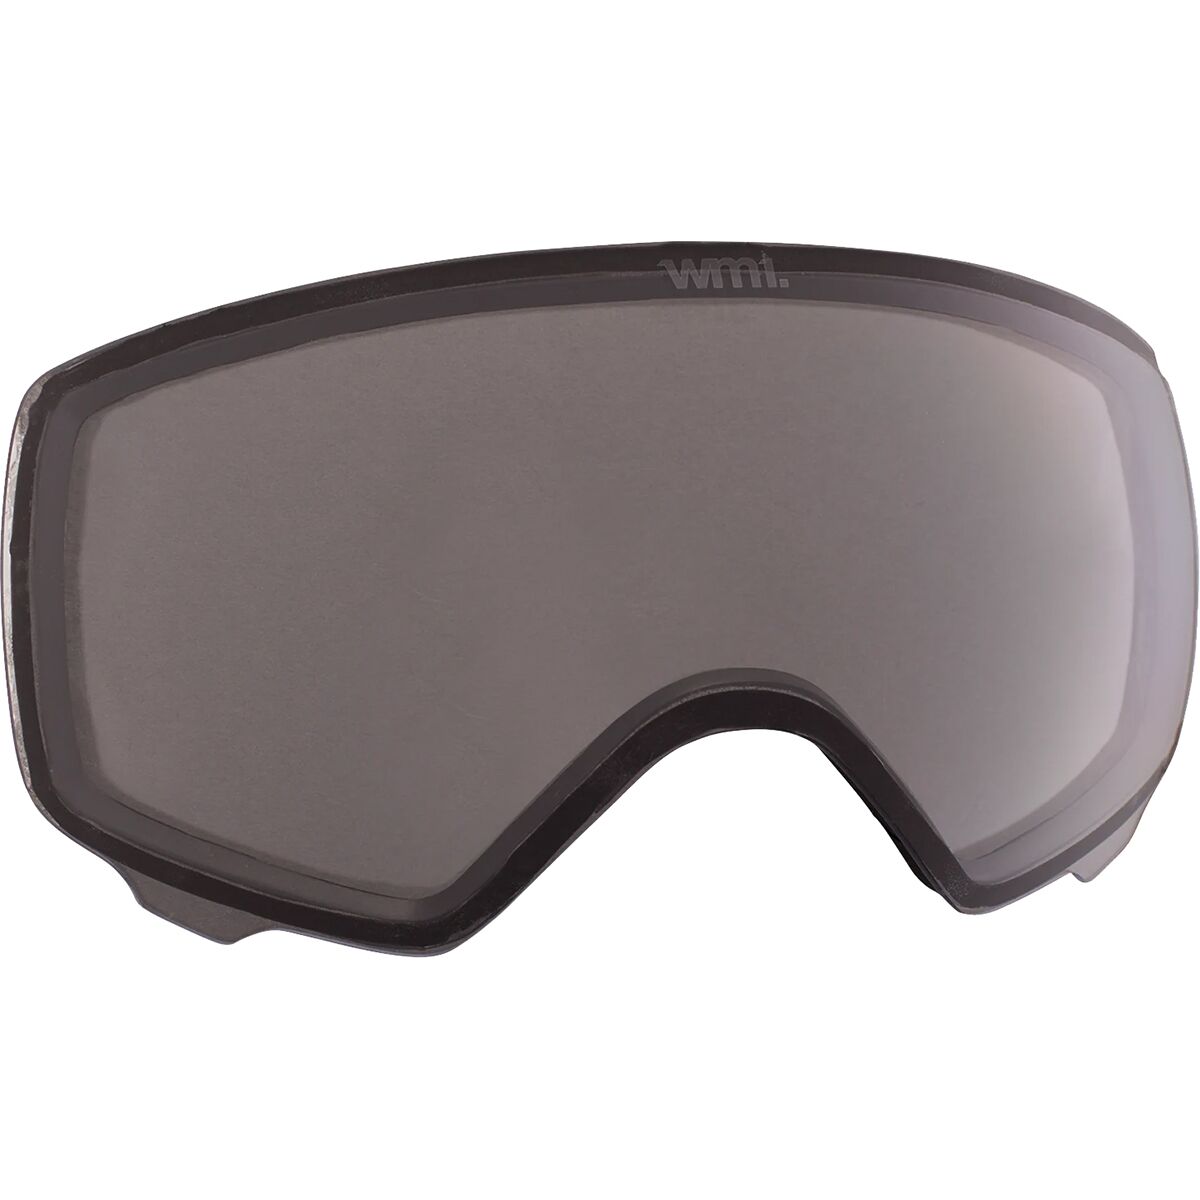 Anon WM1 Goggles Replacement Lens - Women's